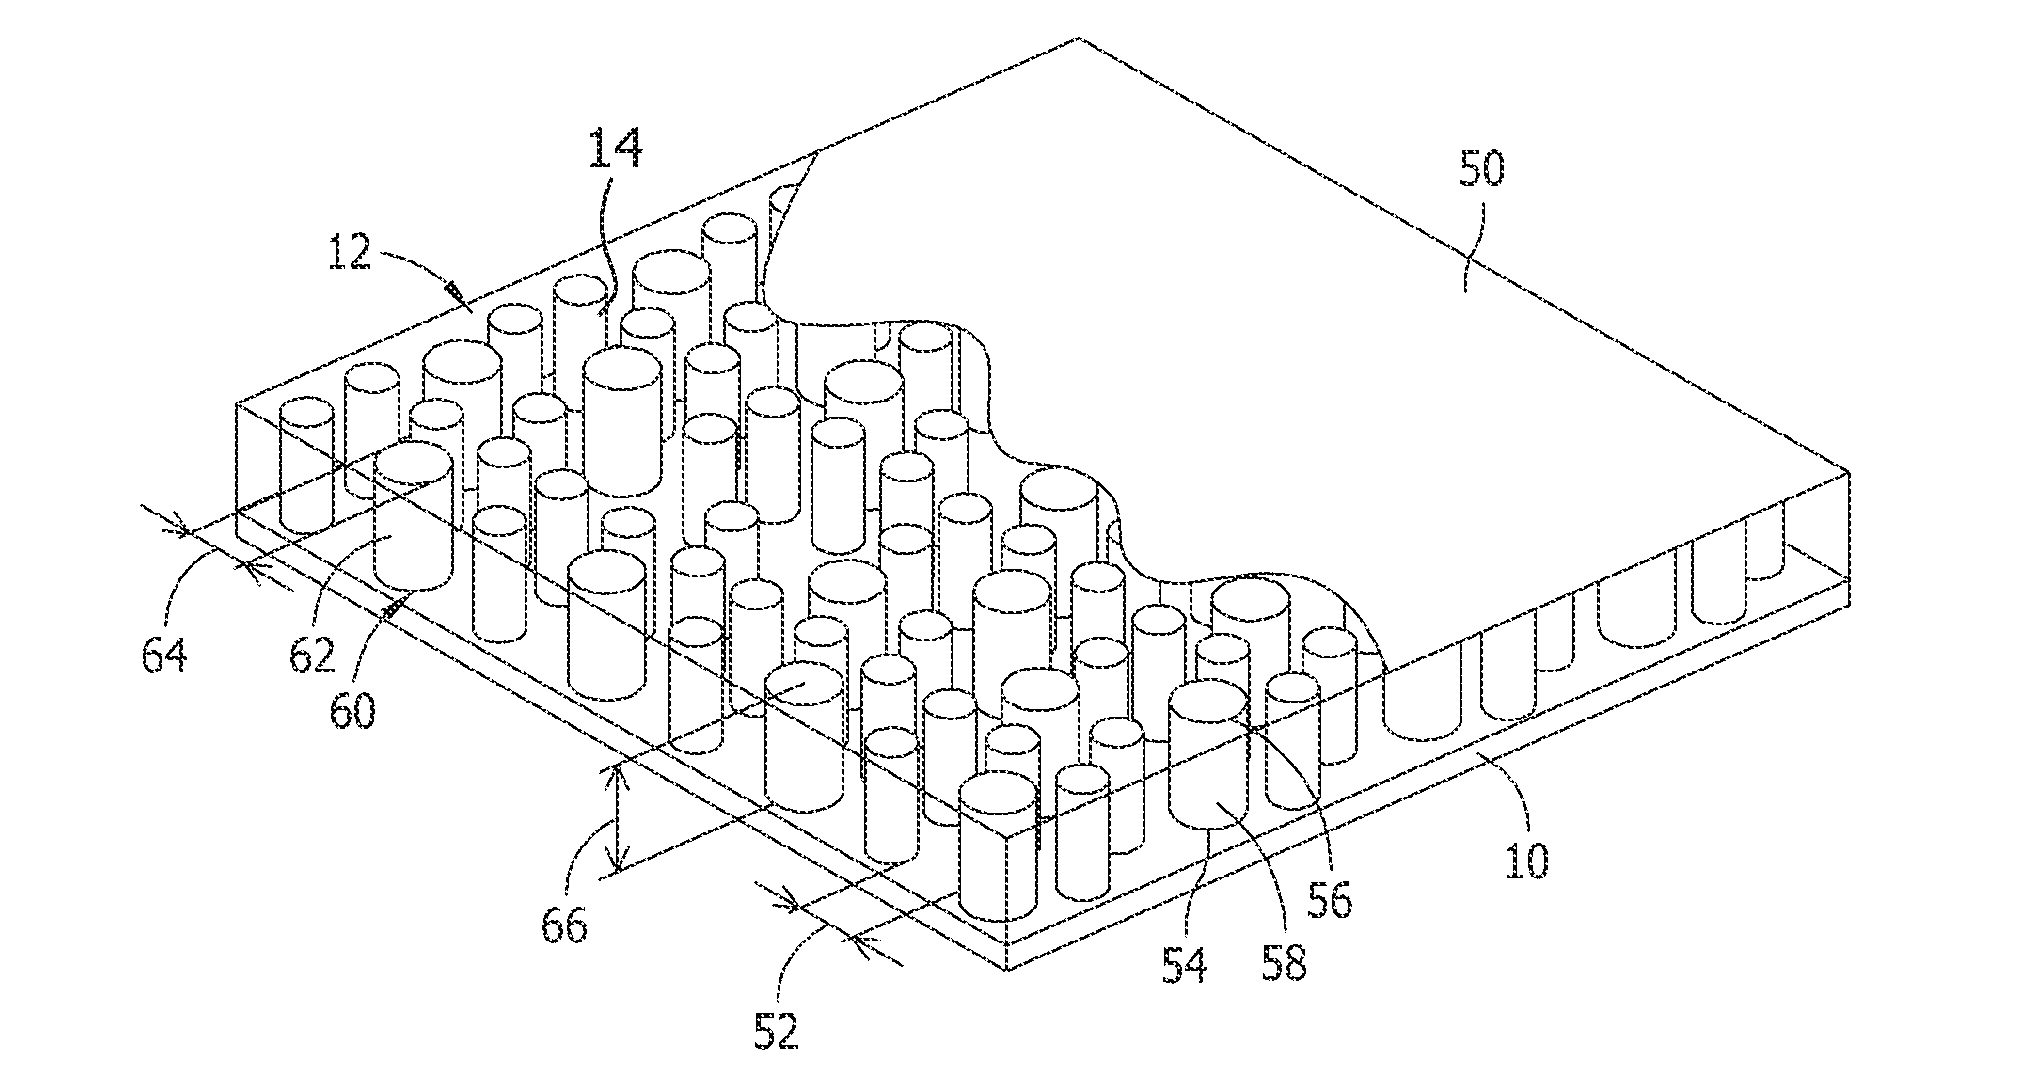 Transducer structure for a transducer probe and methods of fabricating same